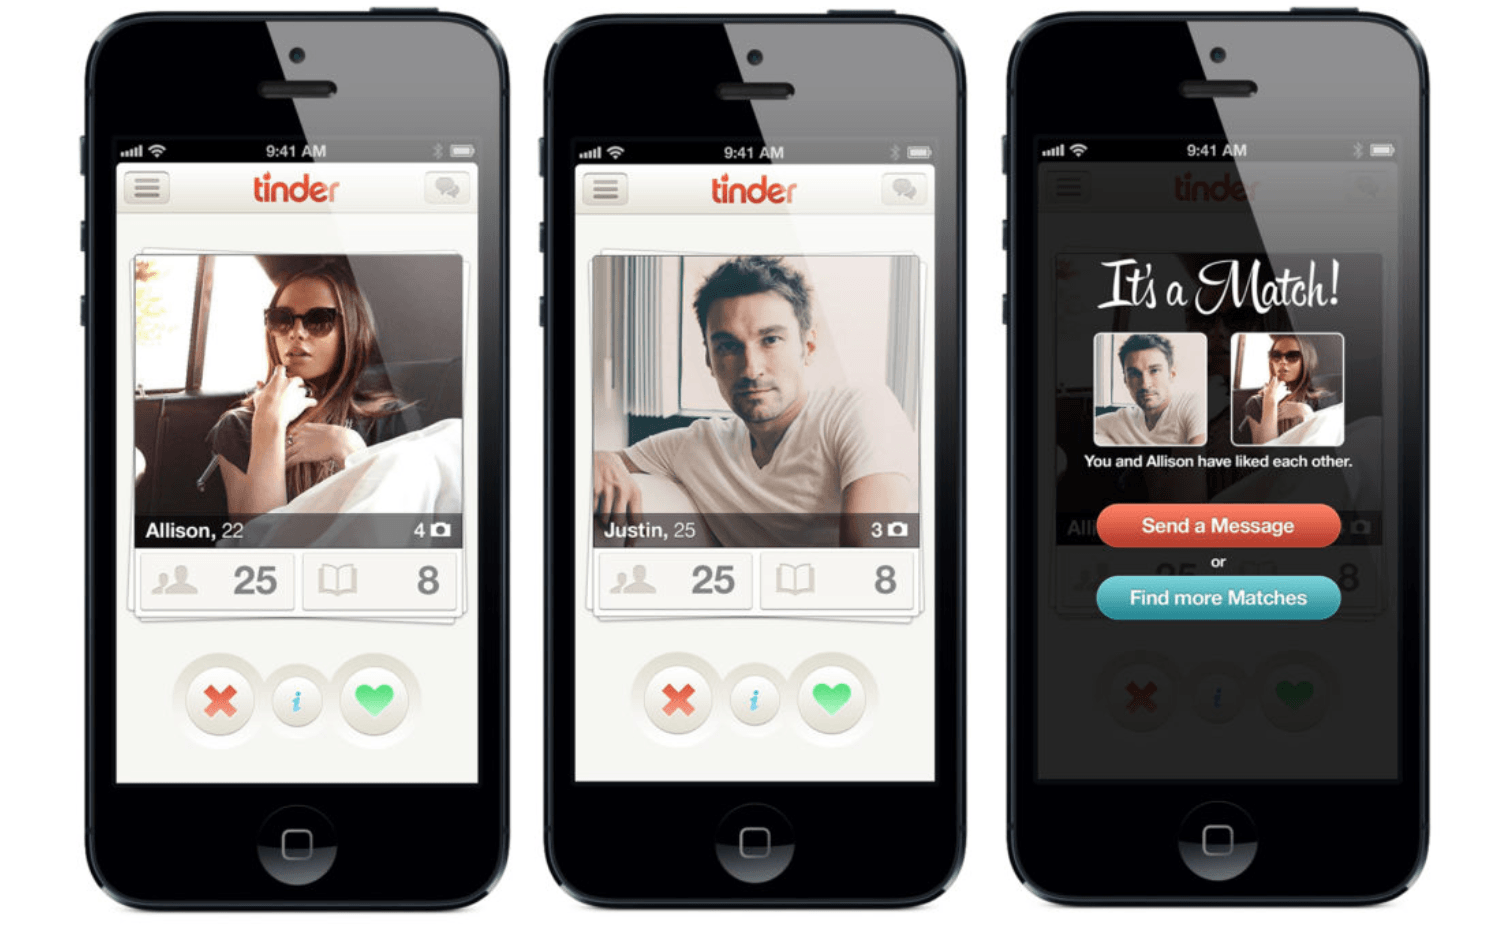 How to log into tinder with new phone number she has moved on eharmony